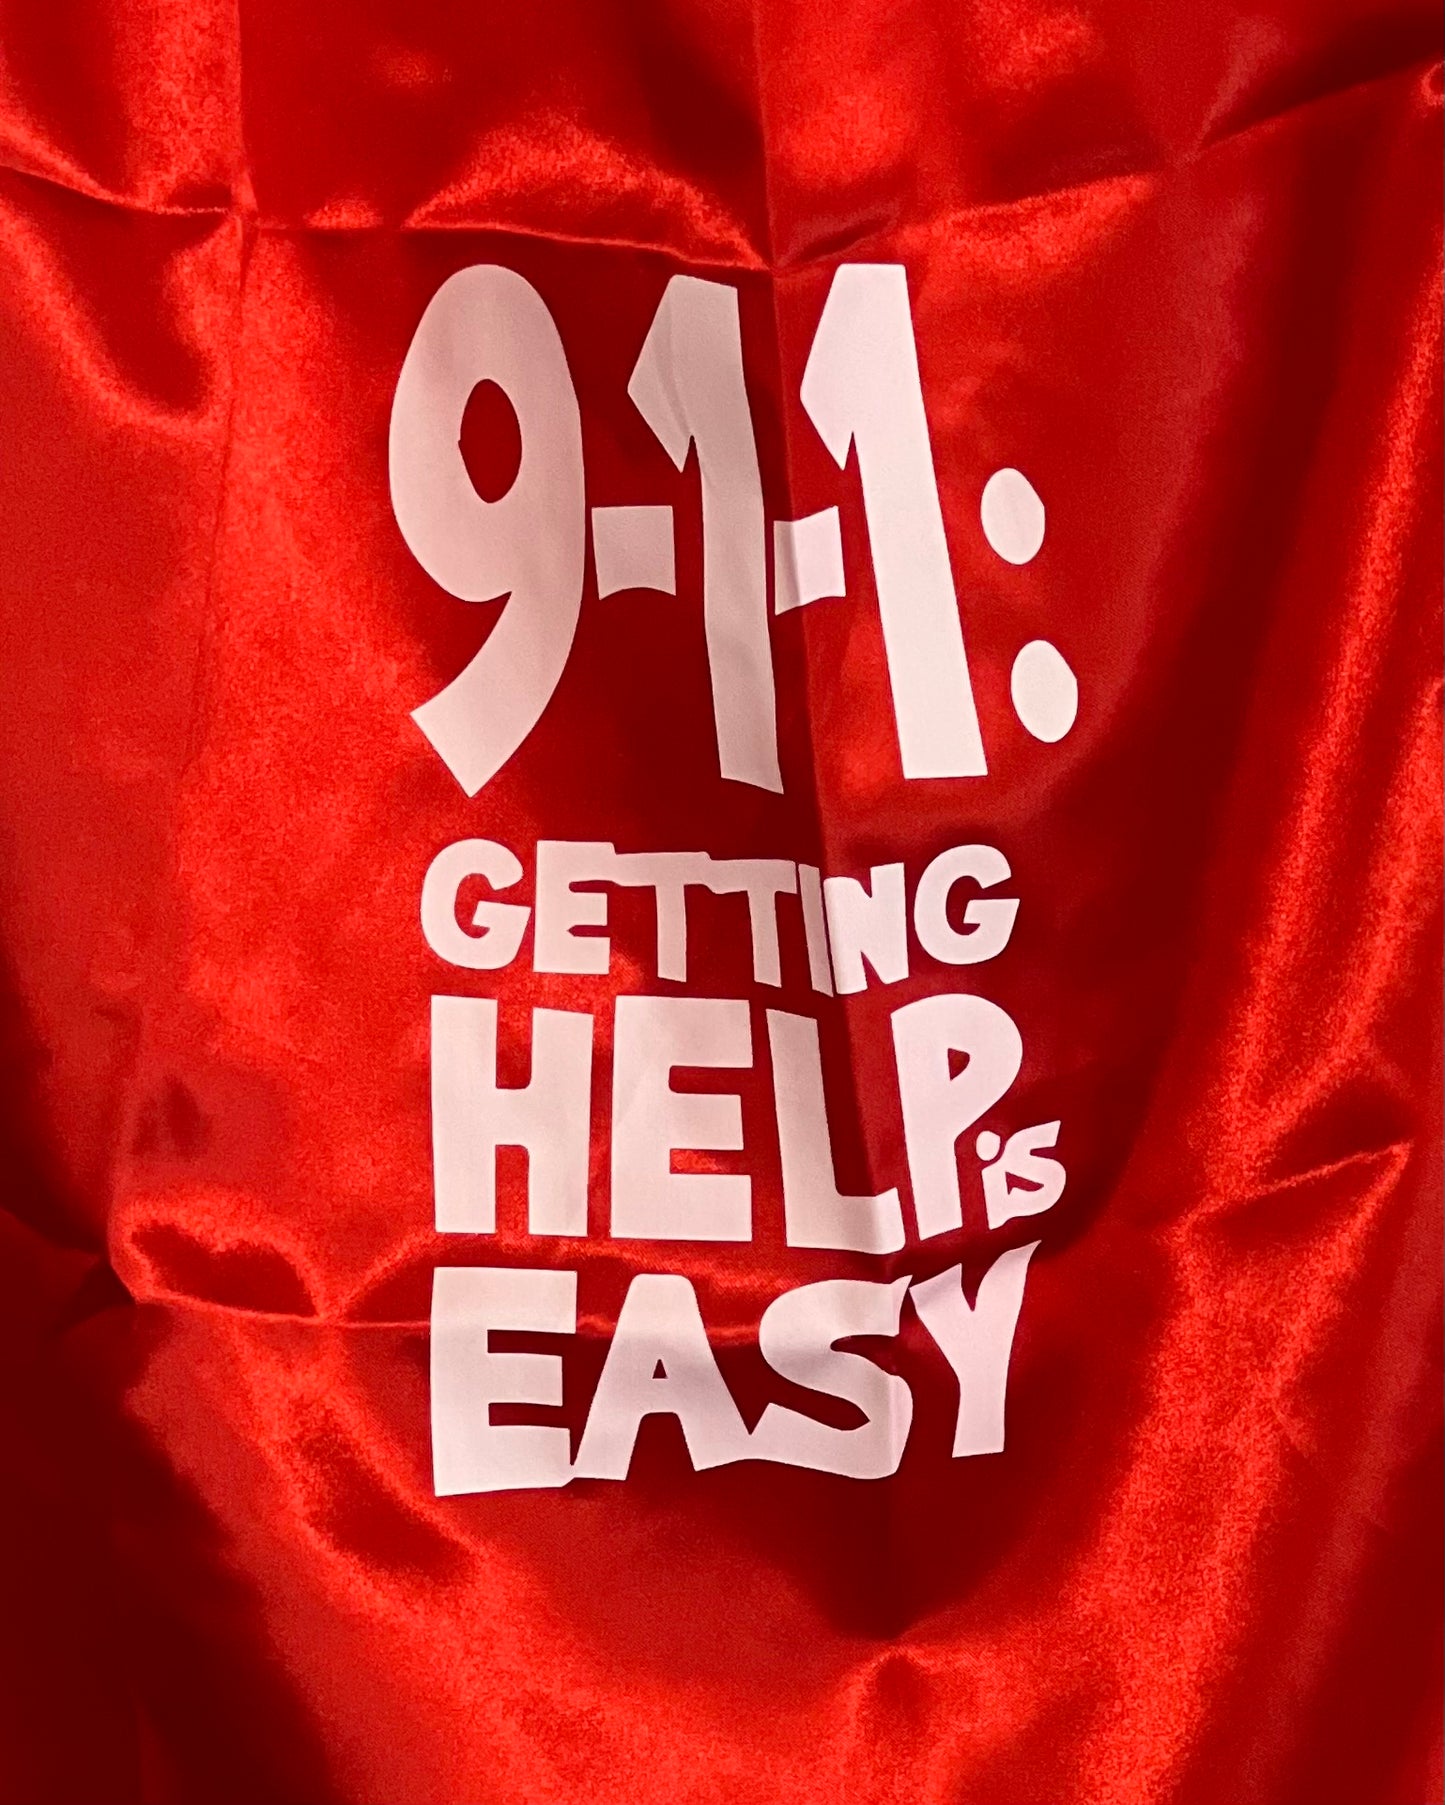 **CLEARANCE** Pkg of 4 - 9-1-1 Getting Help is Easy Superhero Capes